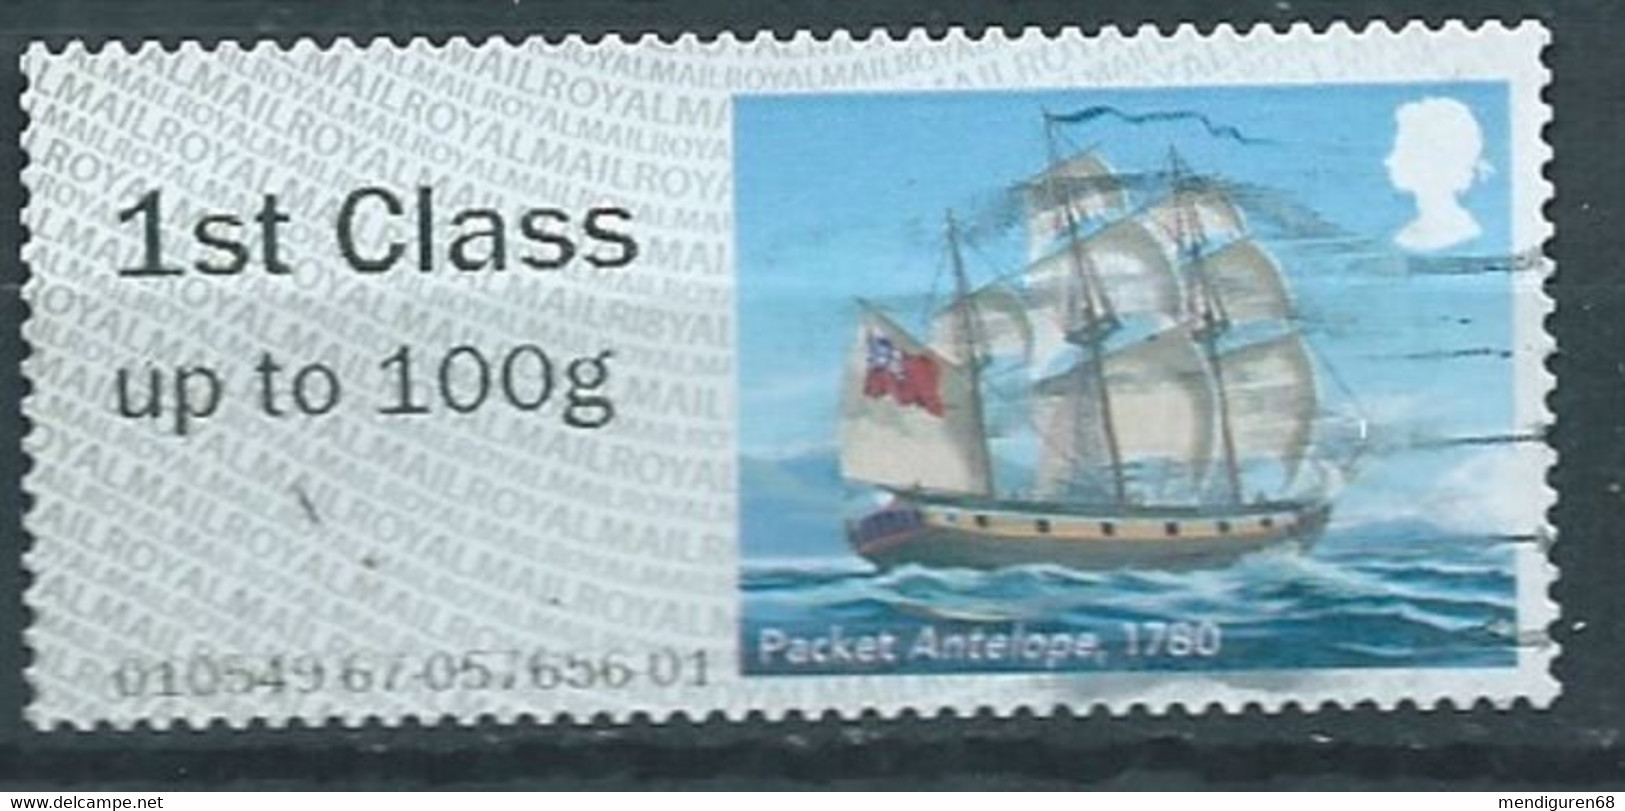 GROSBRITANNIEN GRANDE BRETAGNE GB POST&GO 2018 RMHERITAGE MAIL BY SEA: ANTELOPE FC Up To 100g SG FS207 MI AT139 YT D138 - Post & Go Stamps